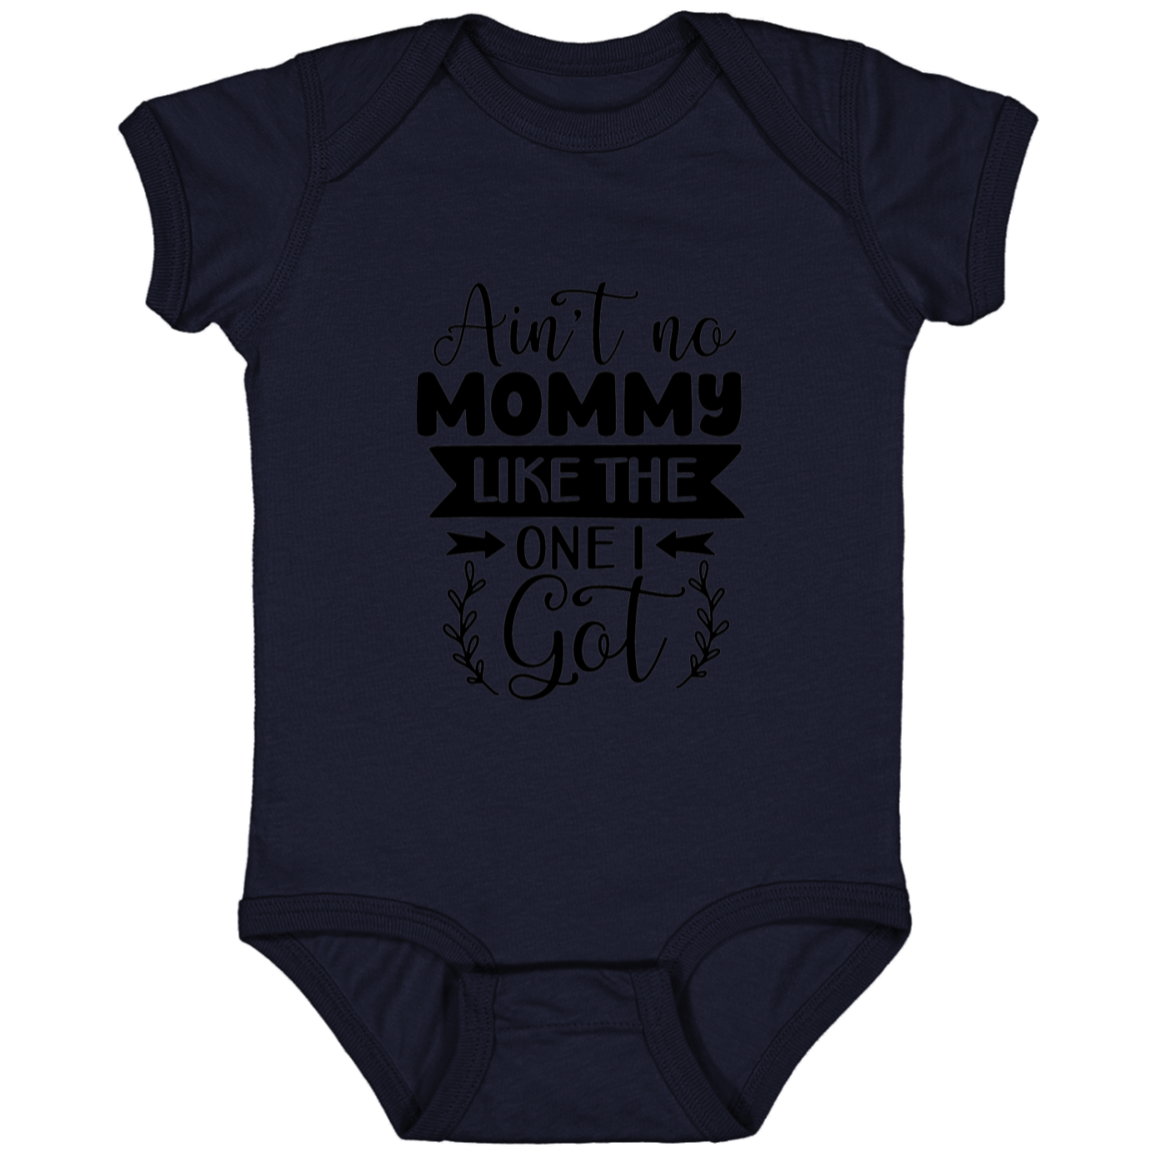 No Mommy like the one I got | Infant Fine Jersey Onesie